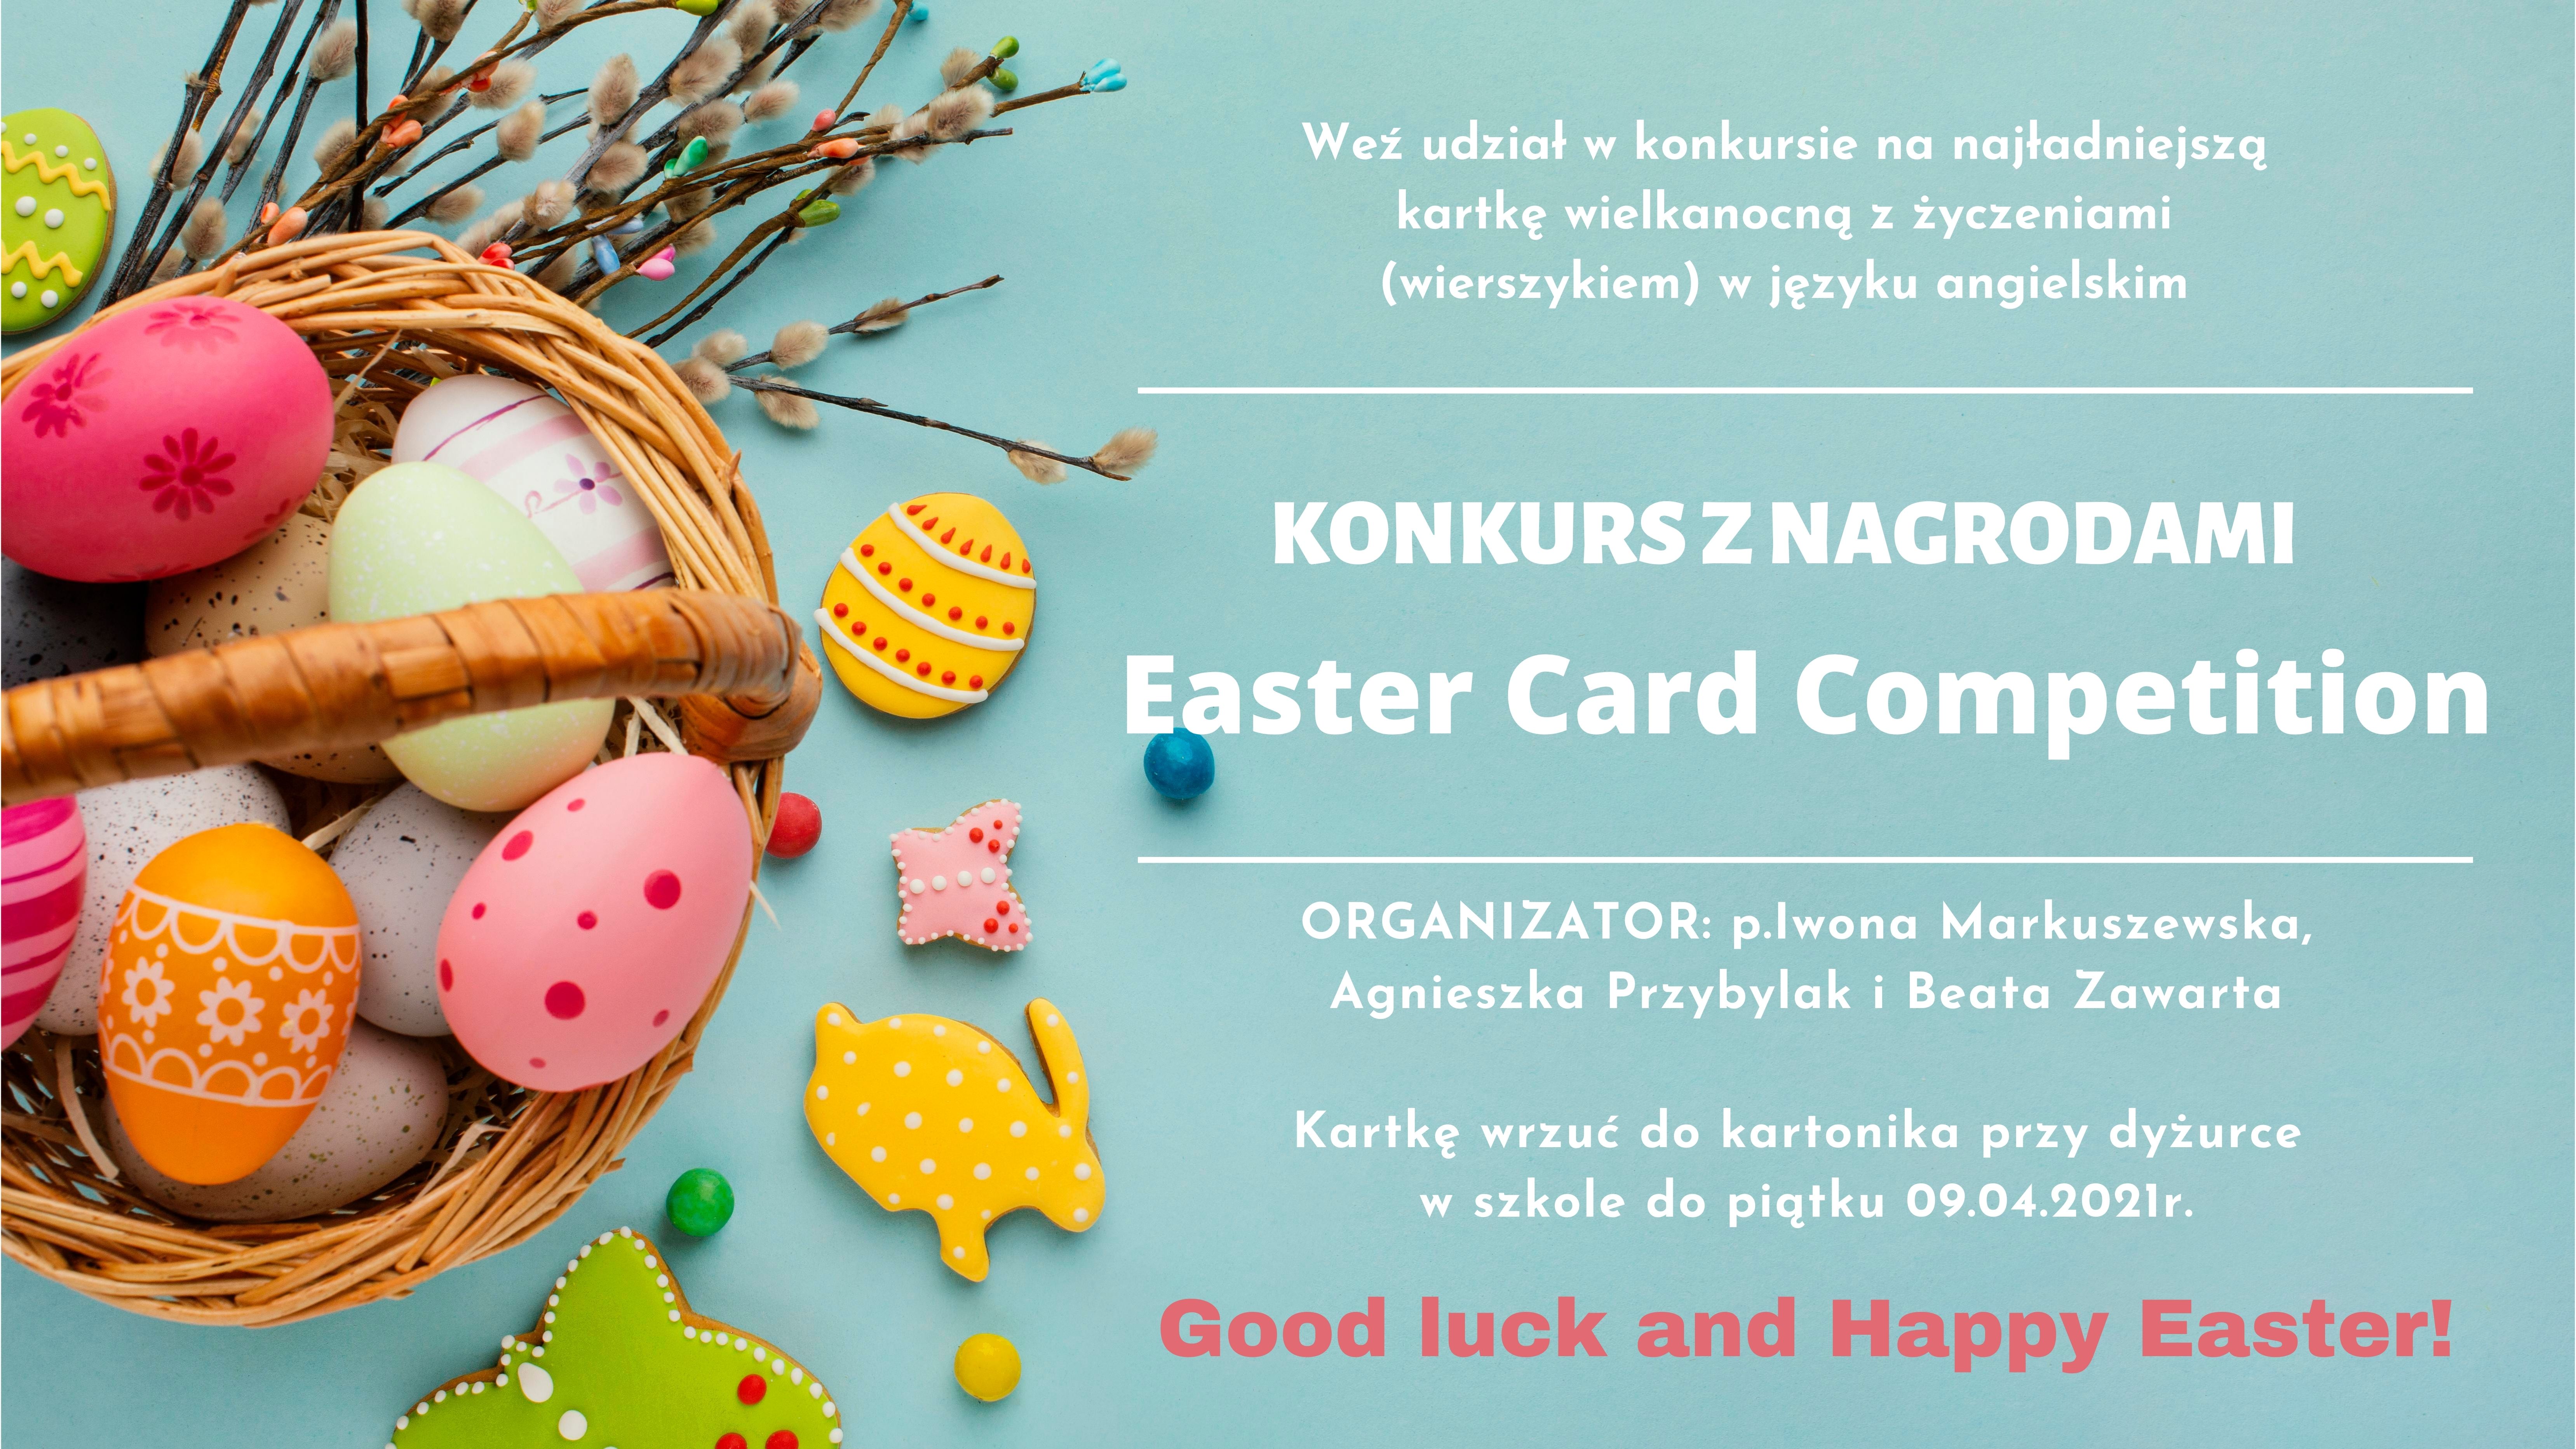 Easter Card Competition